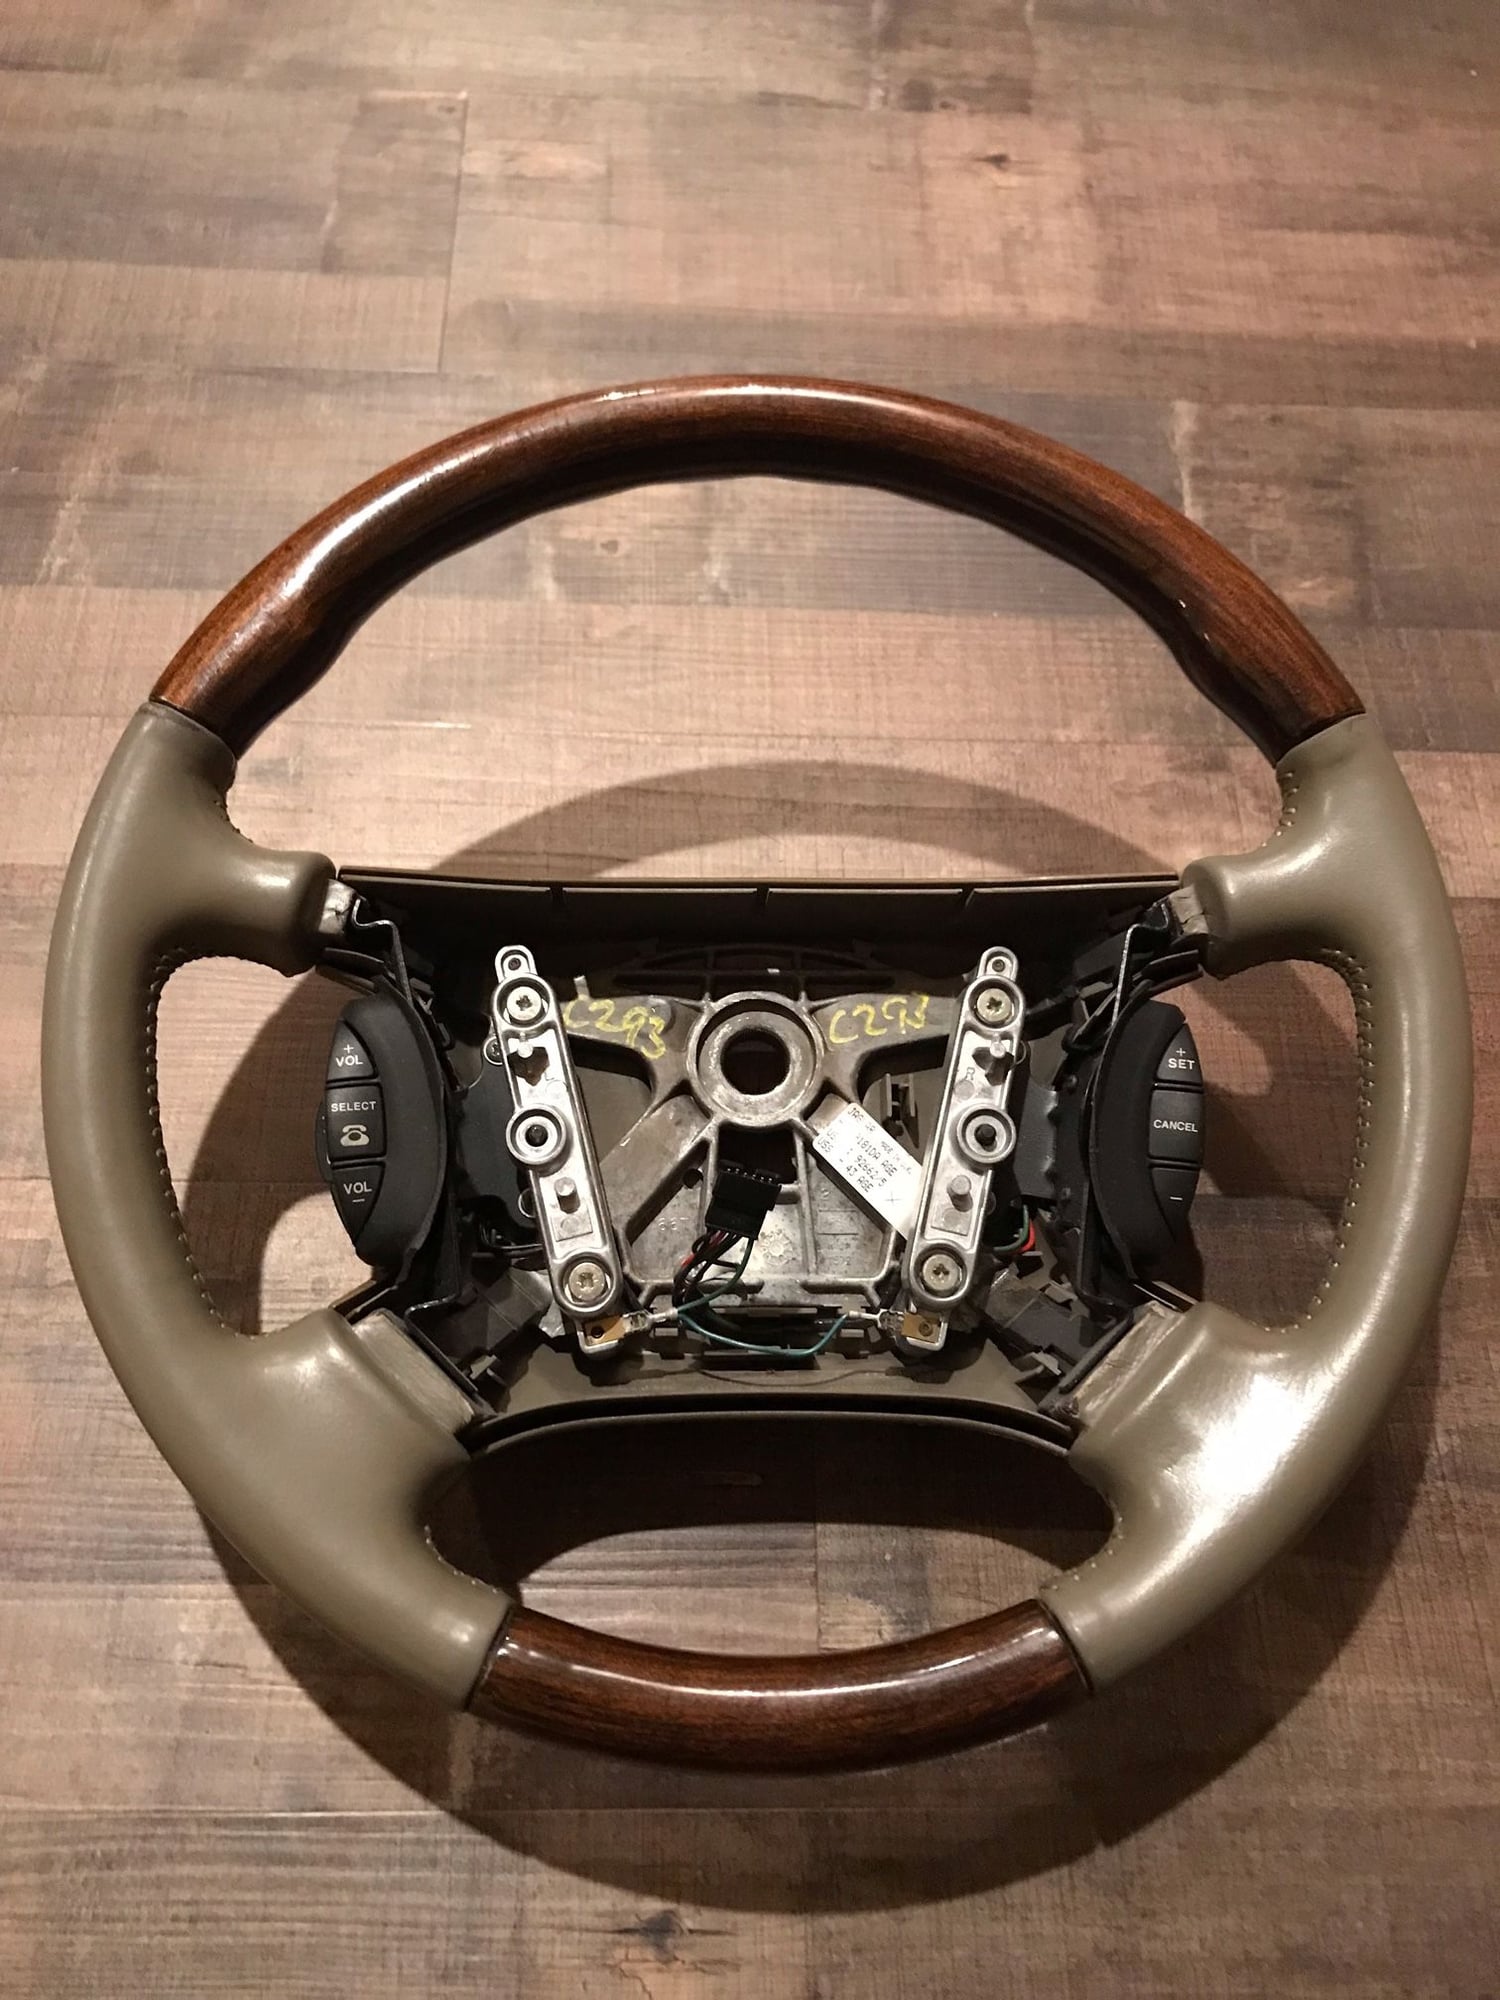 Interior/Upholstery - For Sale Steering Wheels 1997-2006 XK 1998-2003 XJ - Used - 0  All Models - Maryville, TN 37803, United States